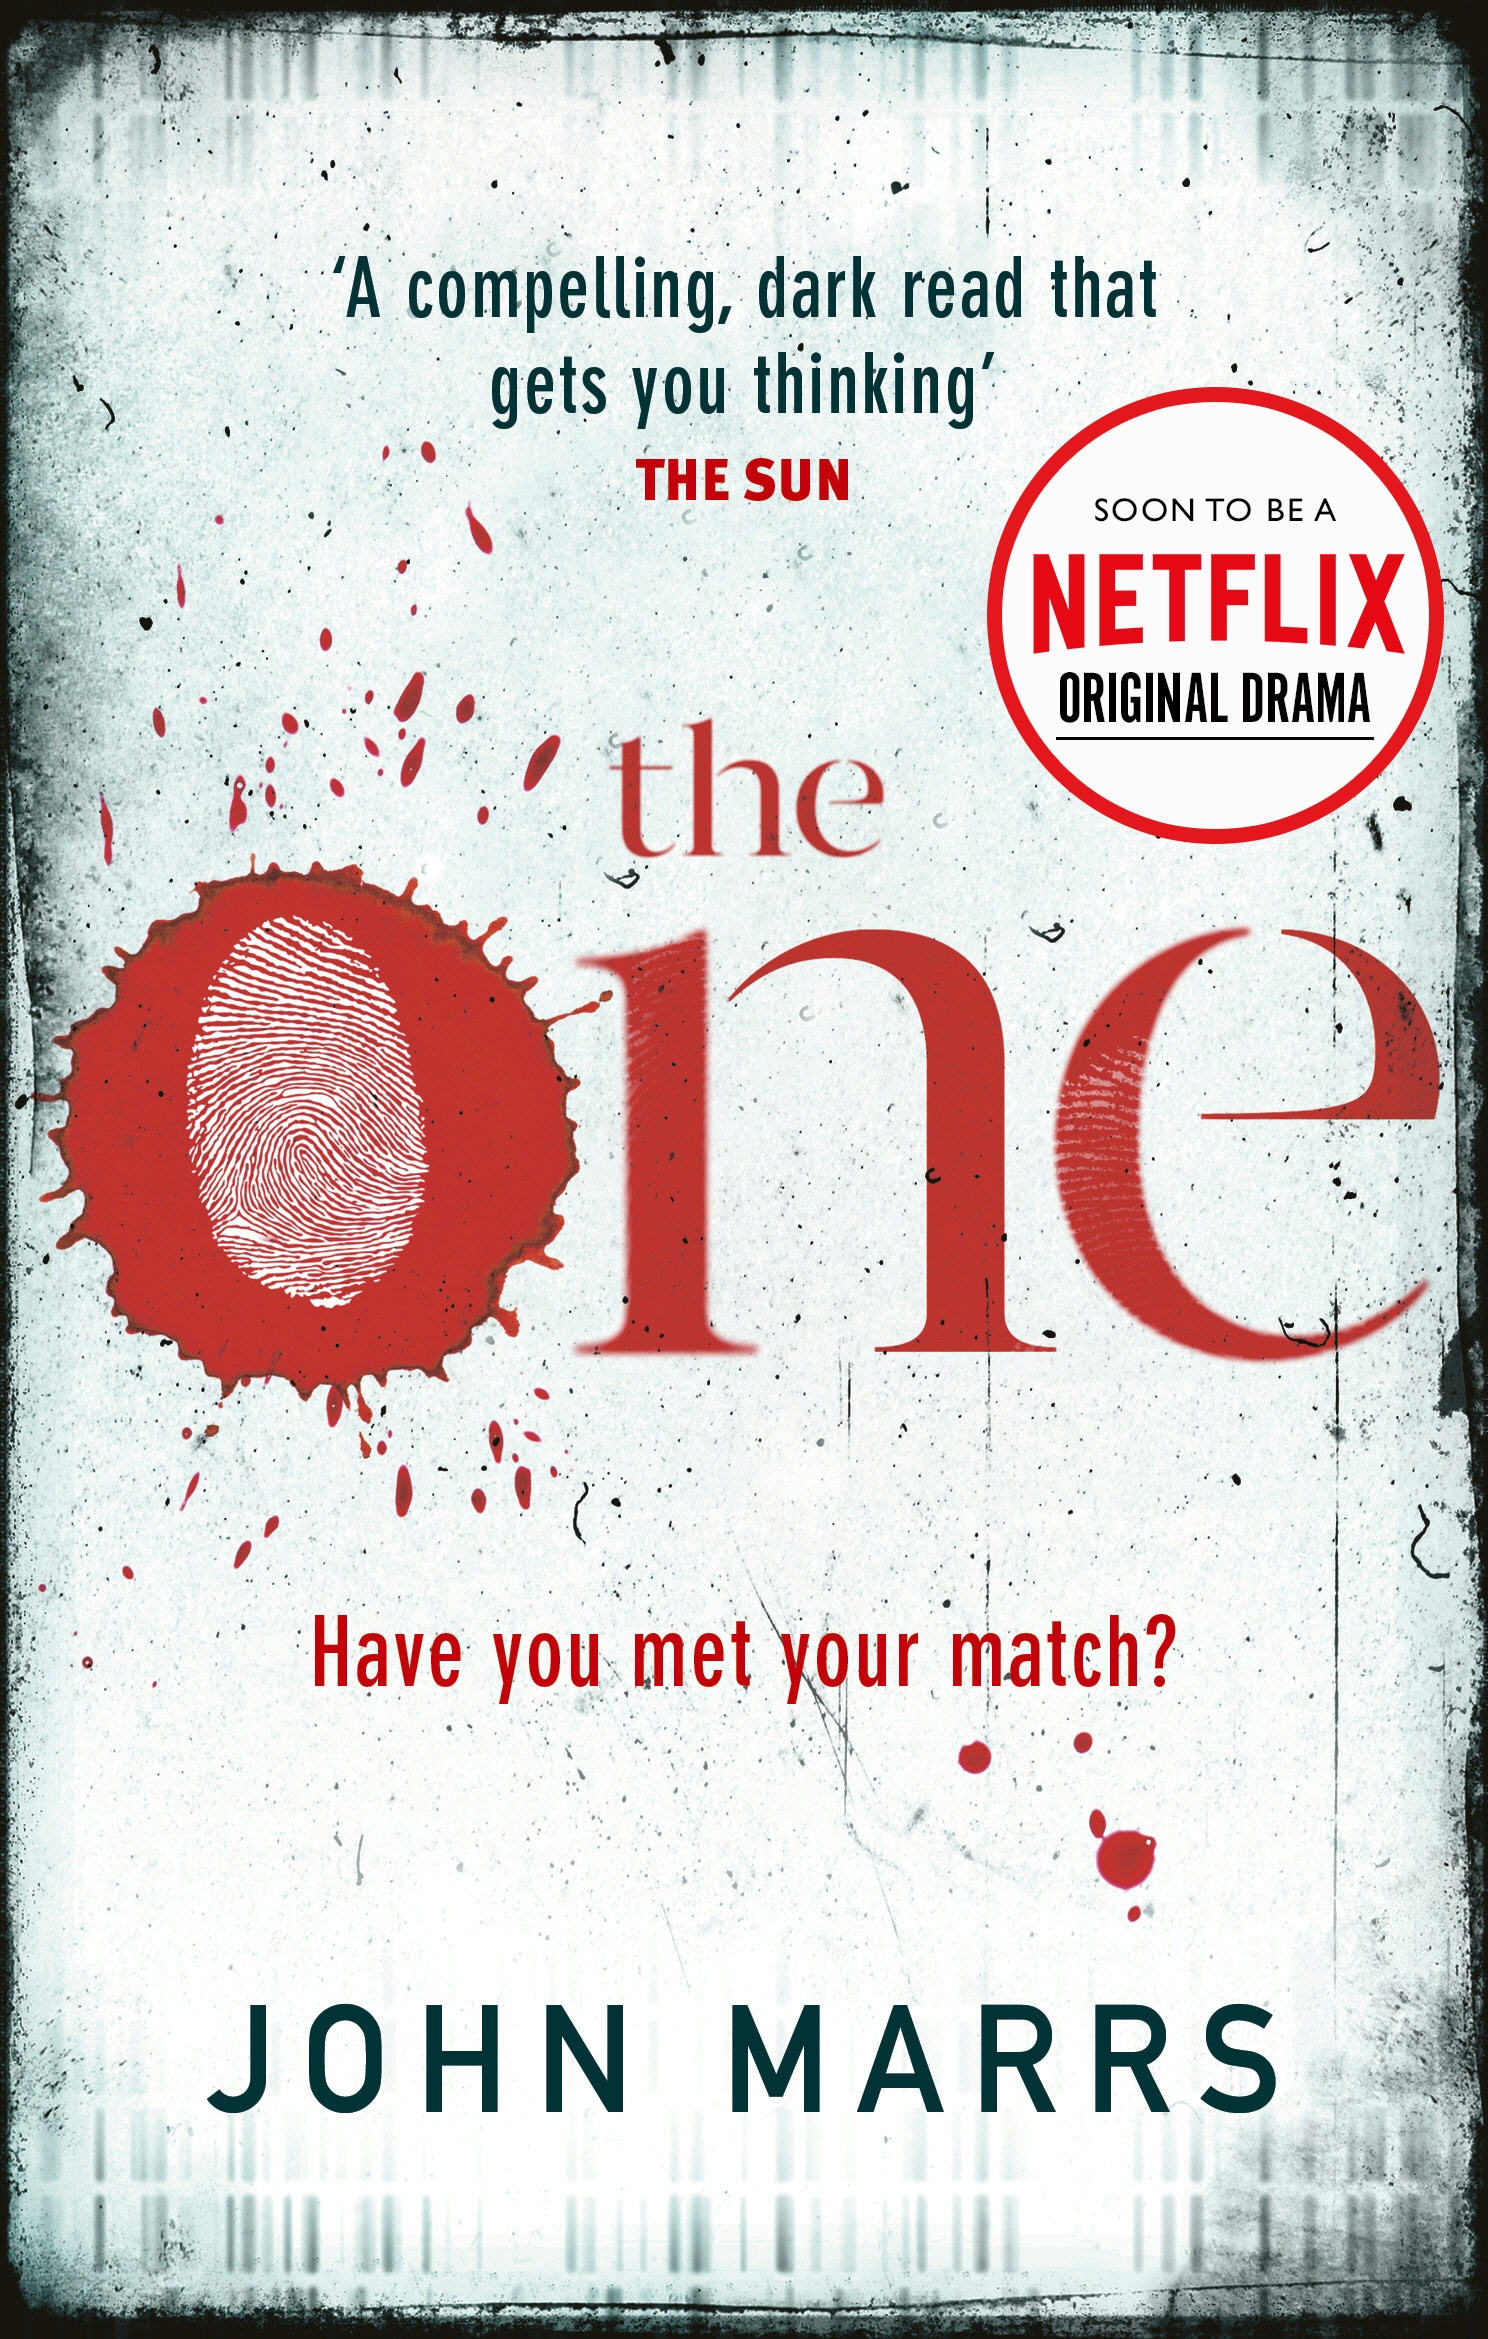 Book “The One” by John Marrs — February 4, 2021